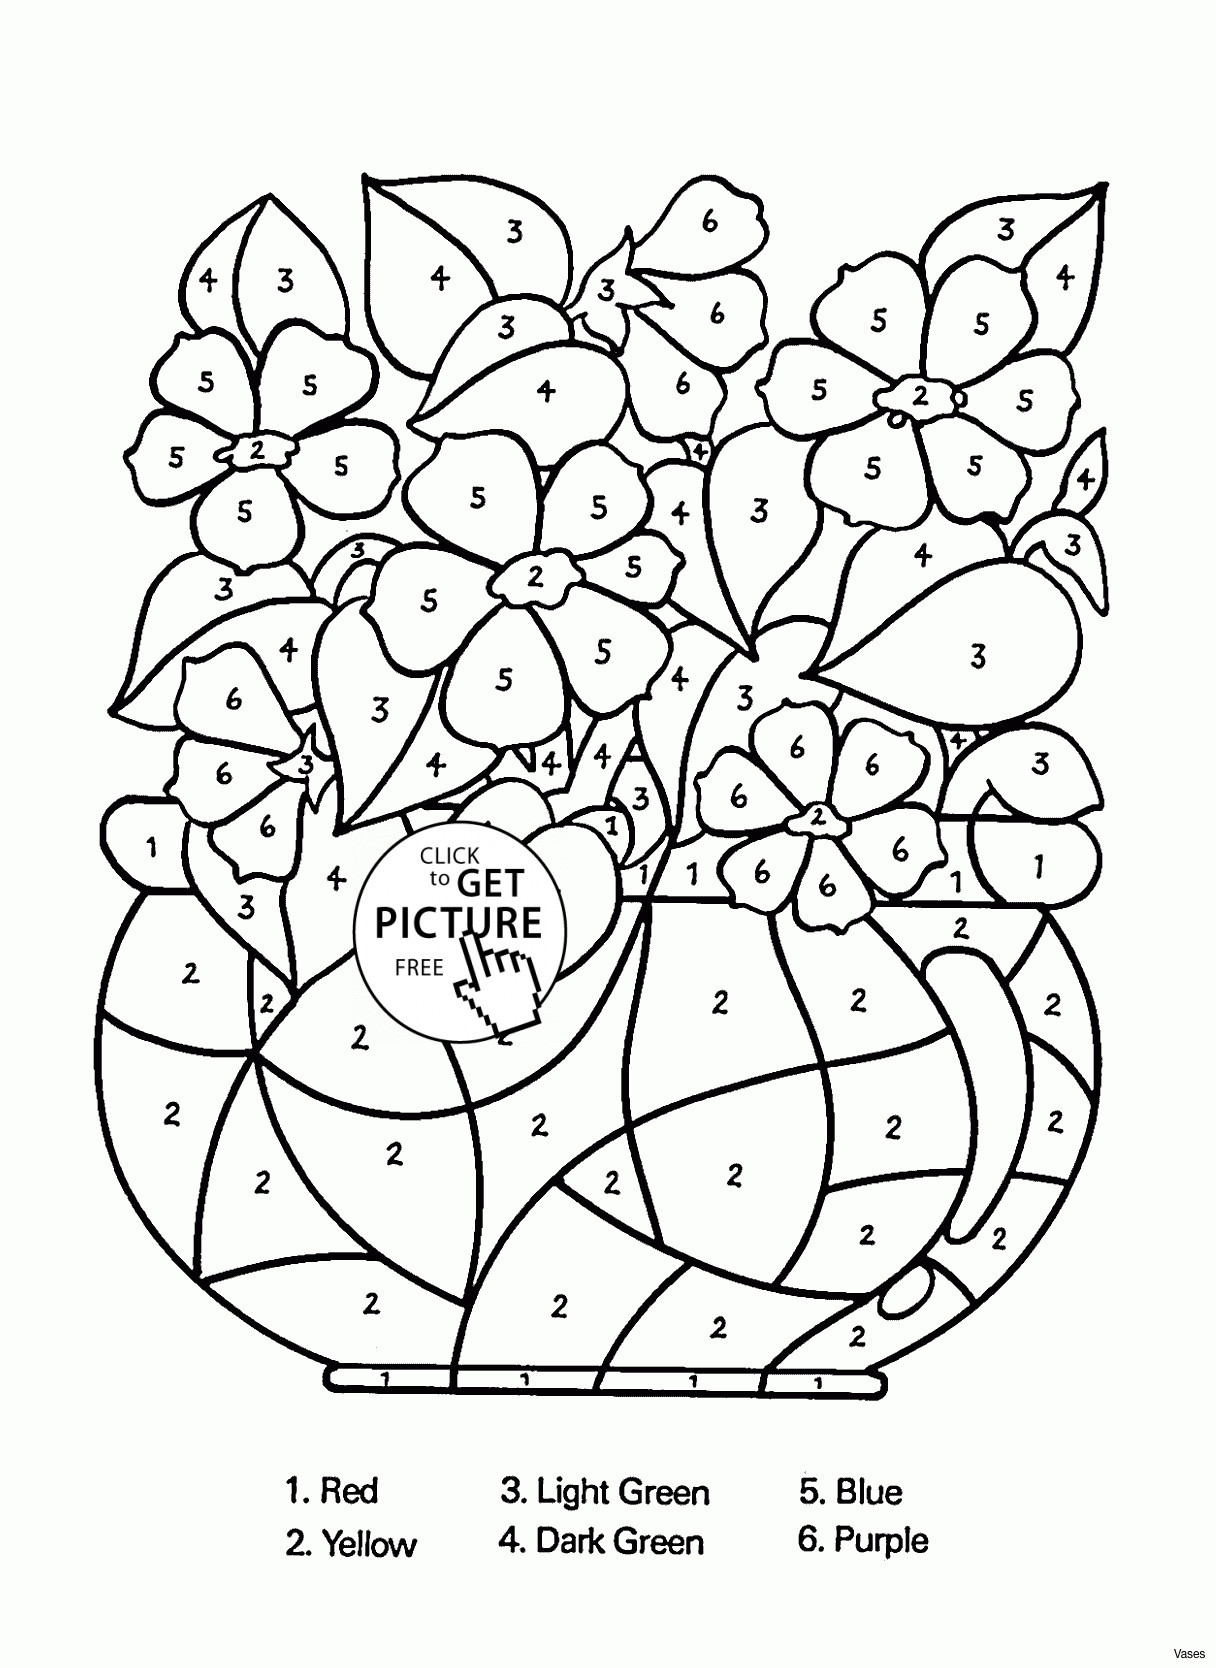 13 attractive White Floor Vase with Flowers 2024 free download white floor vase with flowers of dark green pillows new cool vases flower vase coloring page pages for dark green pillows new cool vases flower vase coloring page pages flowers in a top i